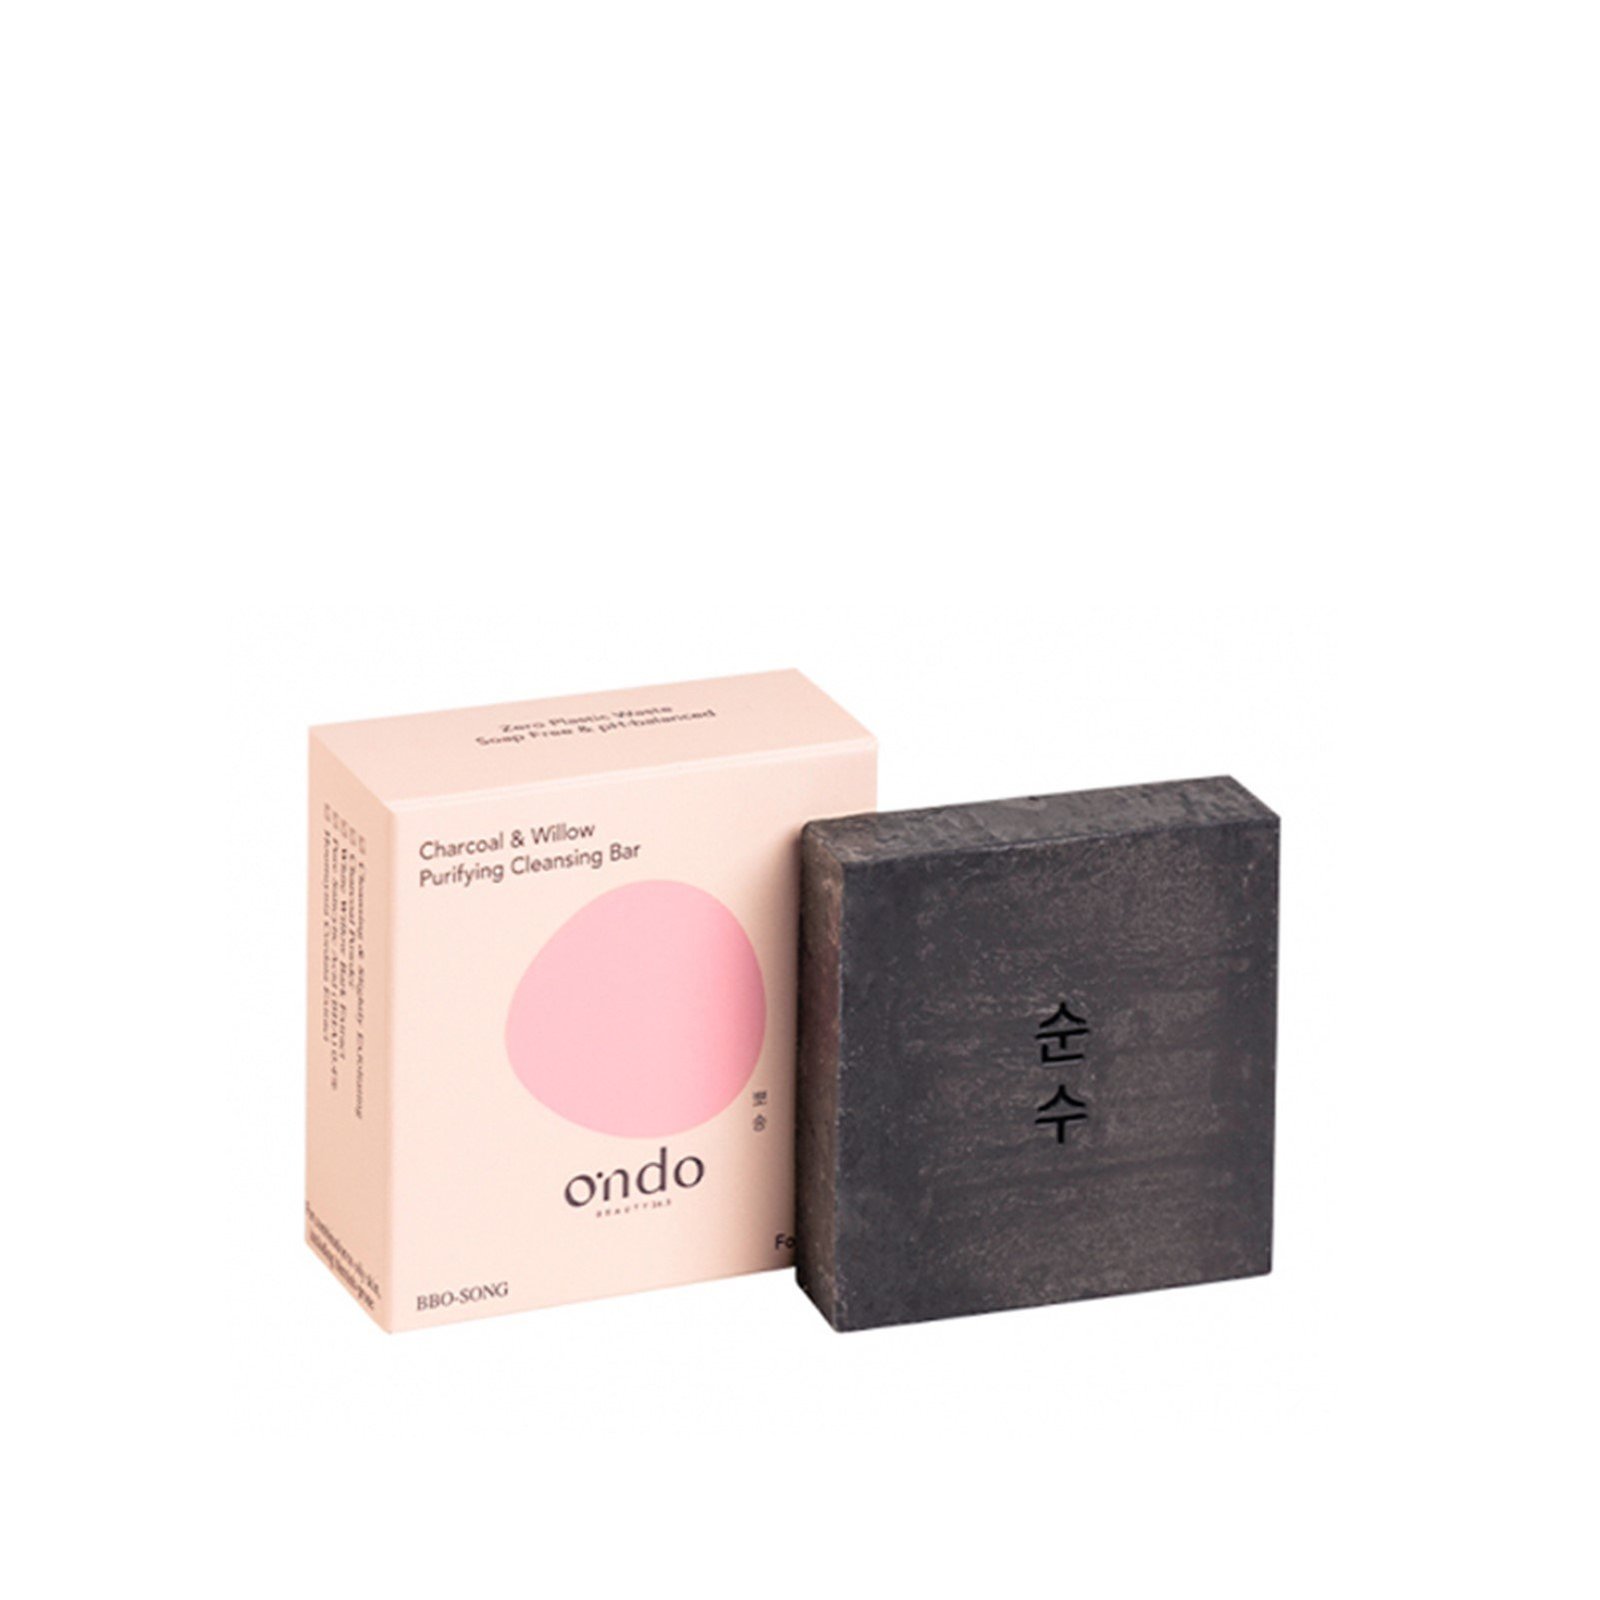 Ondo Beauty 36.5 Charcoal & Willow Purifying Cleansing Bar 70g (2.4 oz)